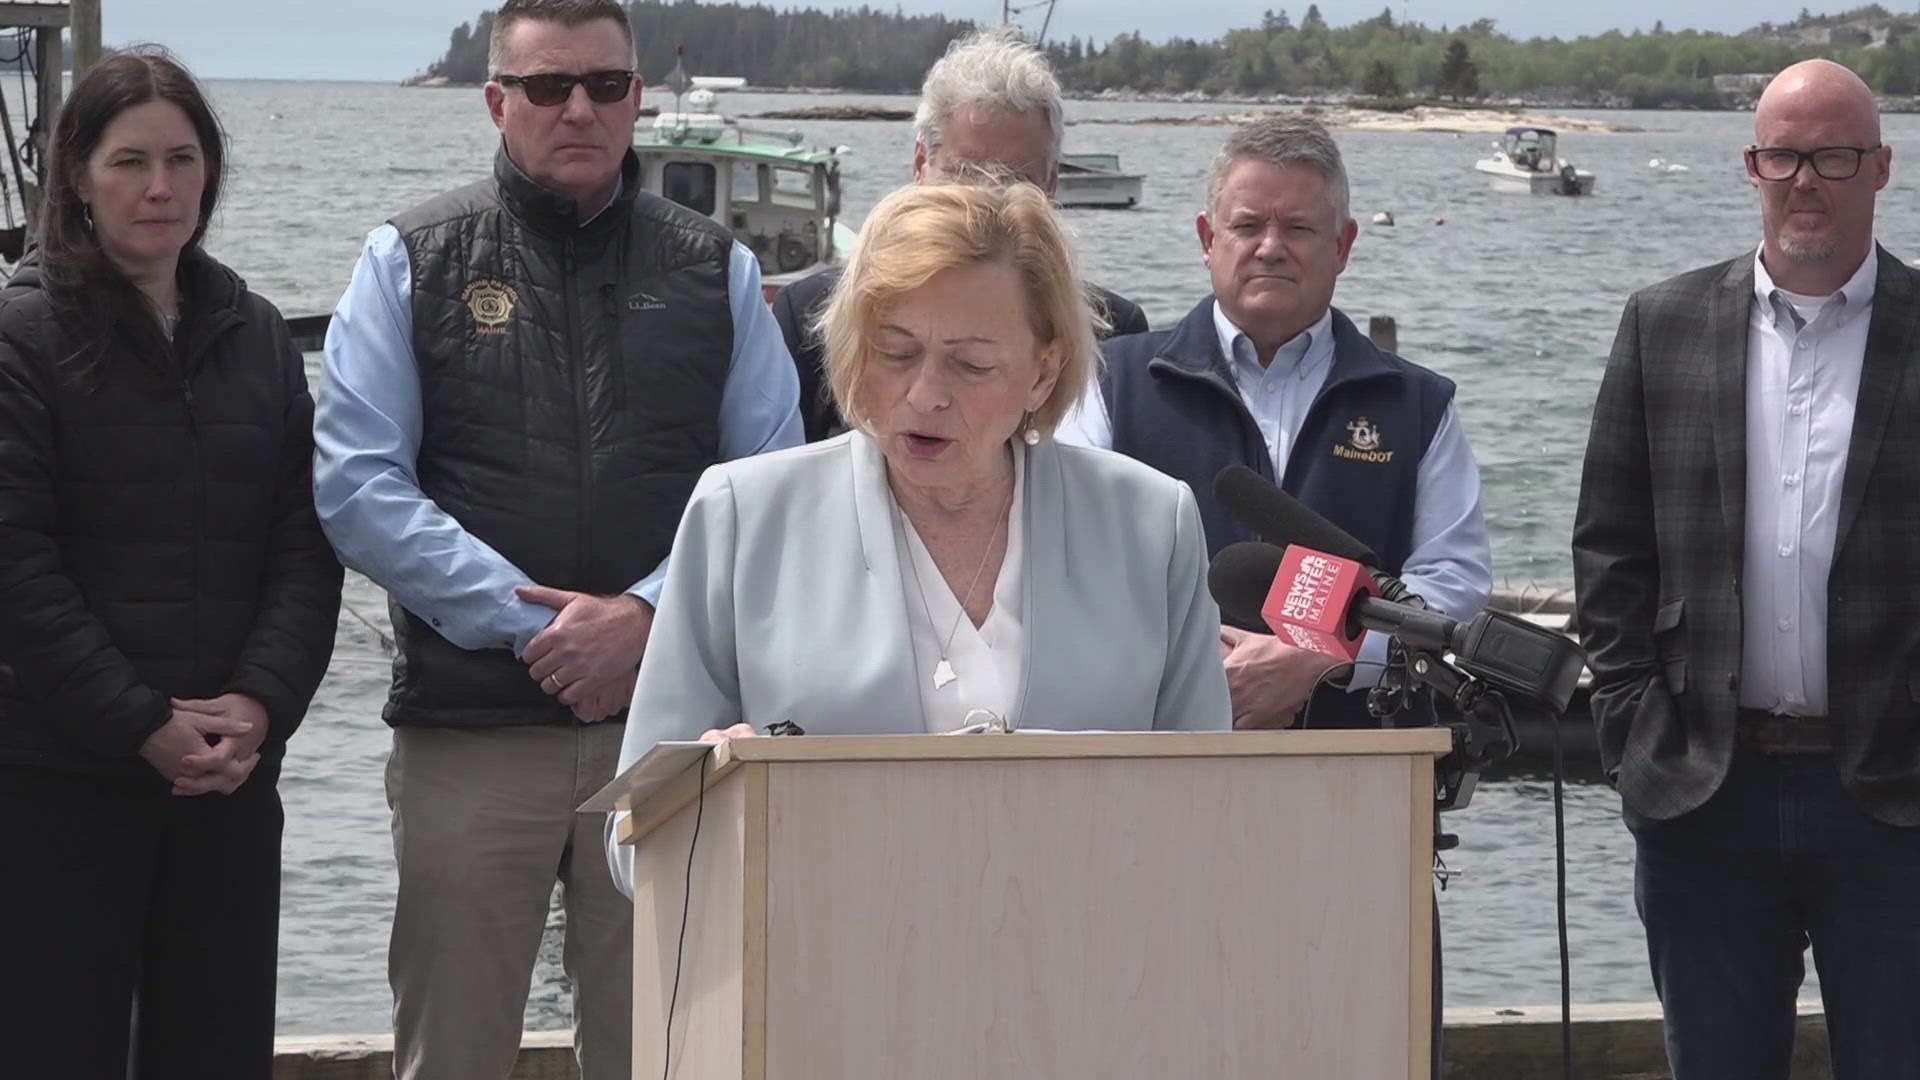 Gov. Janet Mills signed an executive order to create a Maine Infrastructure Rebuilding and Resilience Commission to study response and recovery from recent storms.